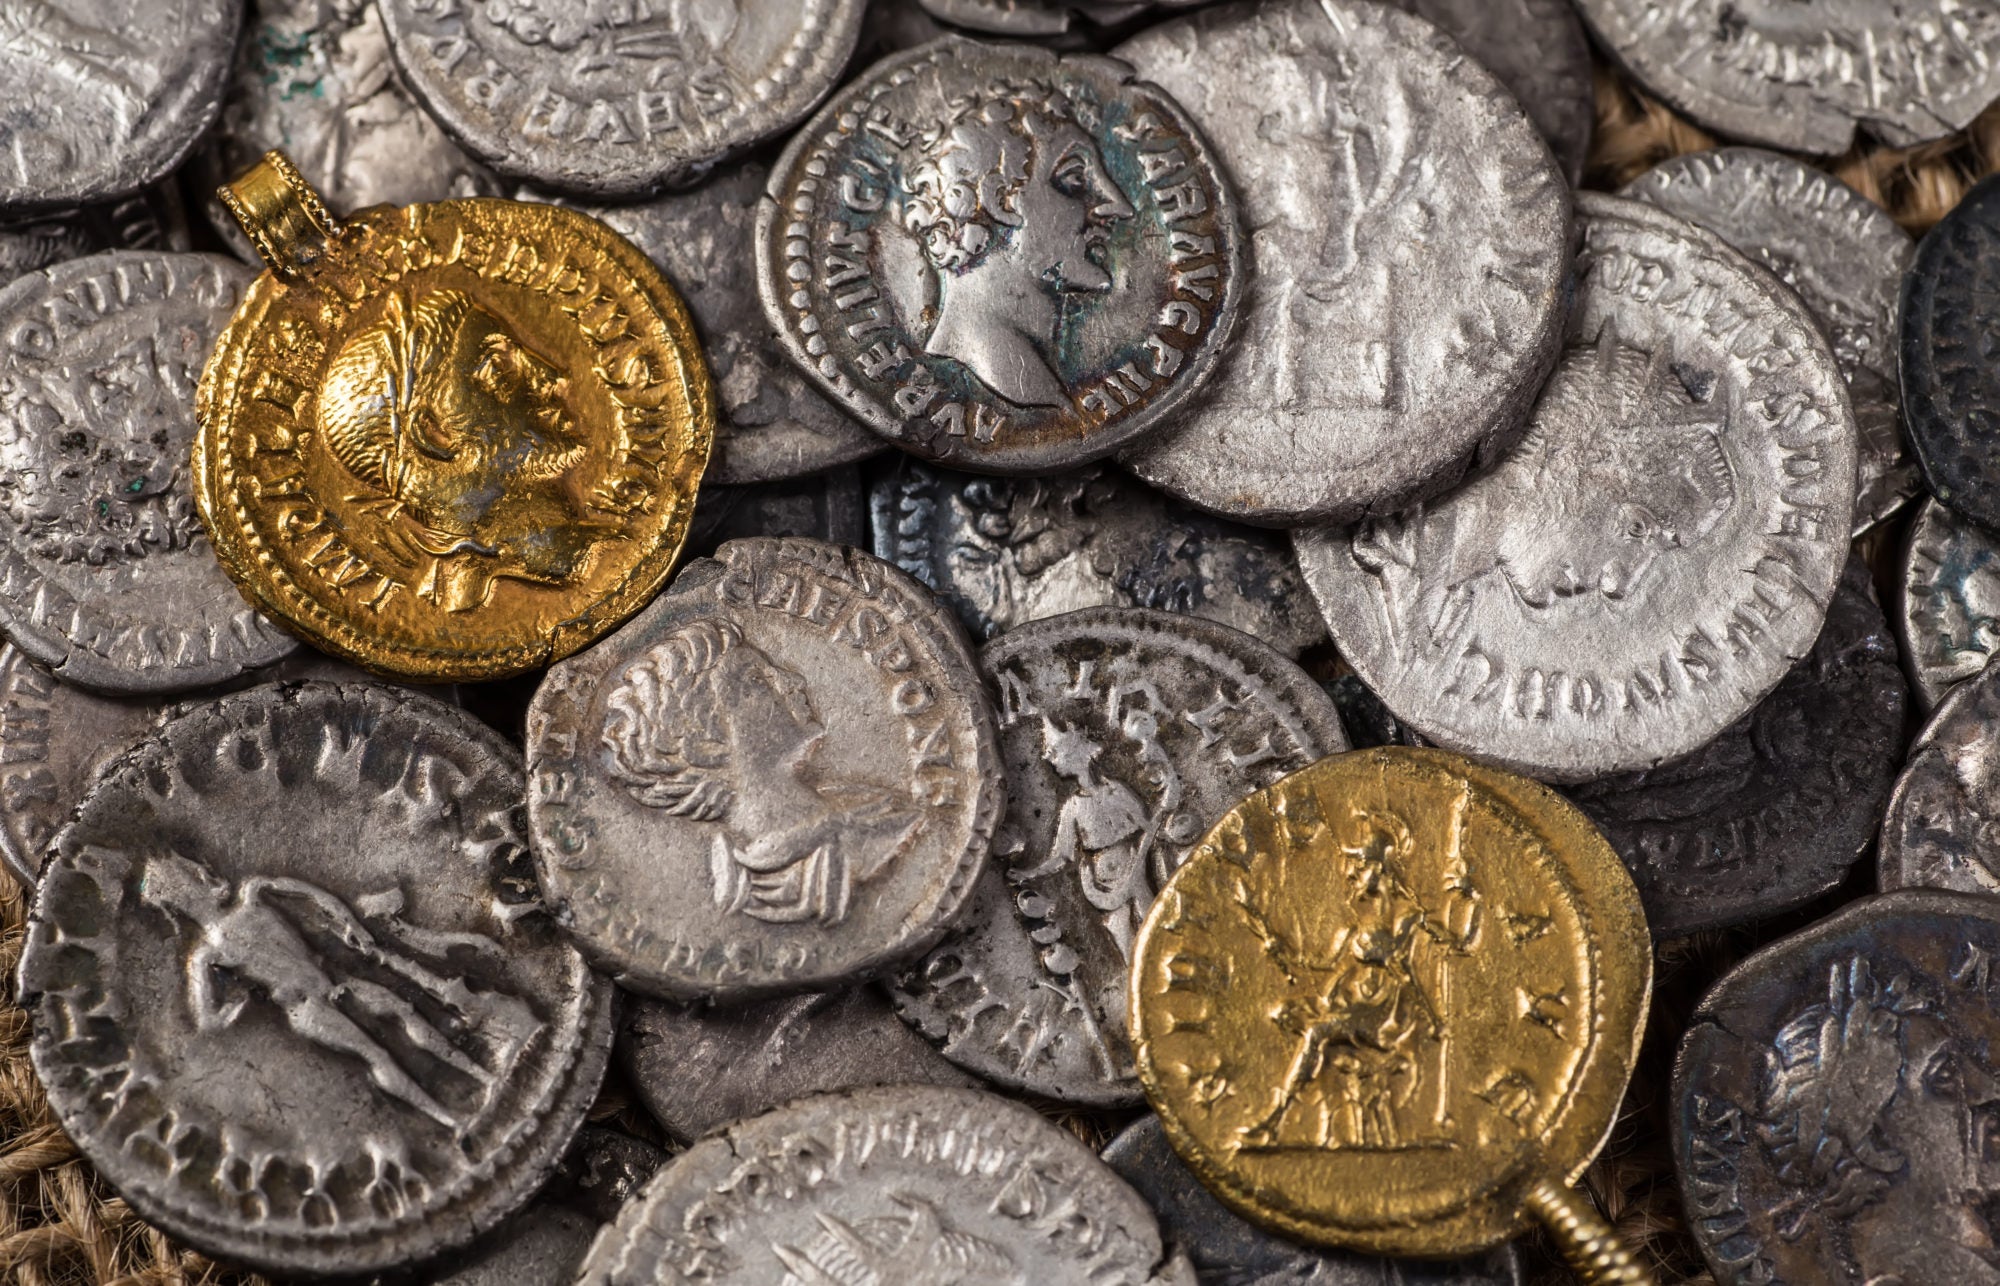 WHAT ARE ANCIENT ROMAN COINS?